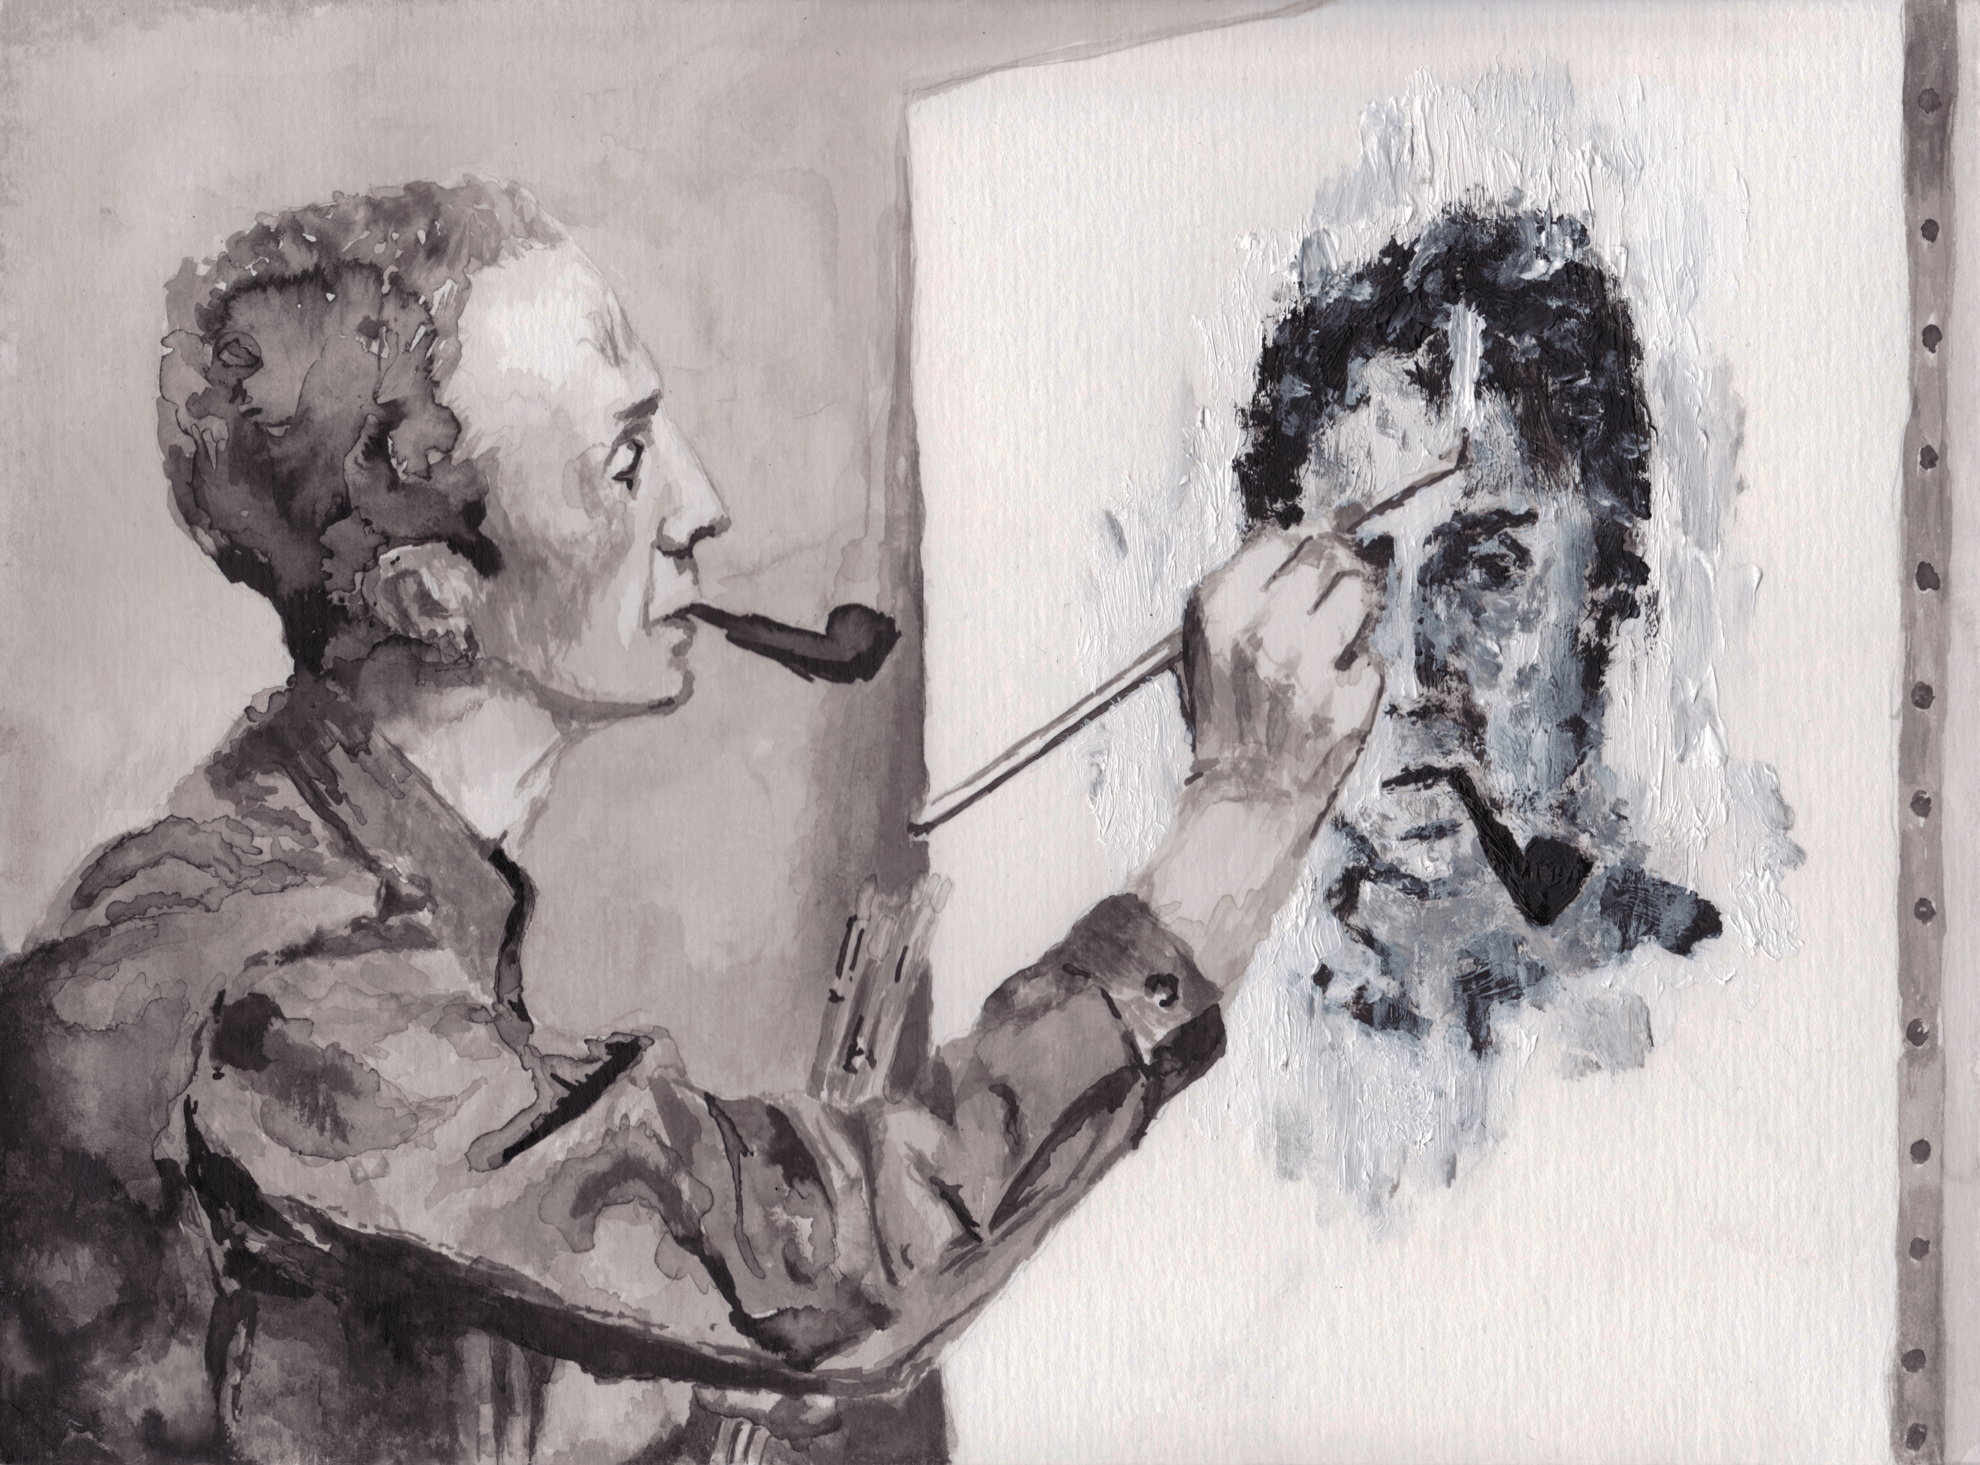 Portrait of Norman Rockwell Painting Norman Rockwell